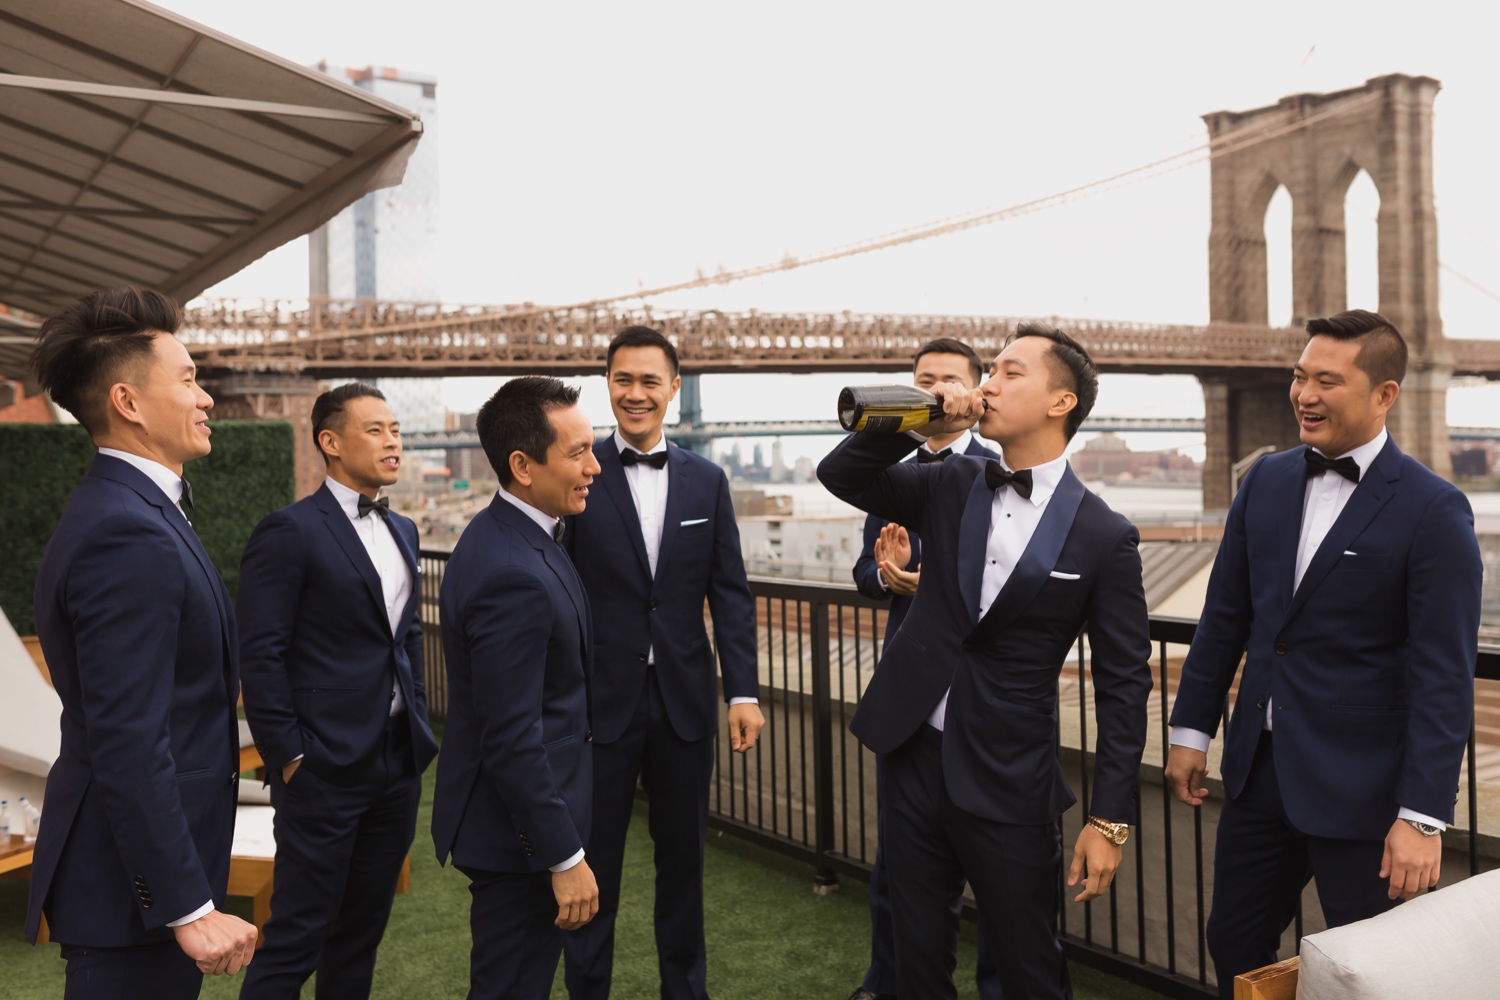 A groom drinking a bottle of champagne as a celebration in Mr. C seaport hotel on a wedding day at Cipriani Wall Street in New York City. 